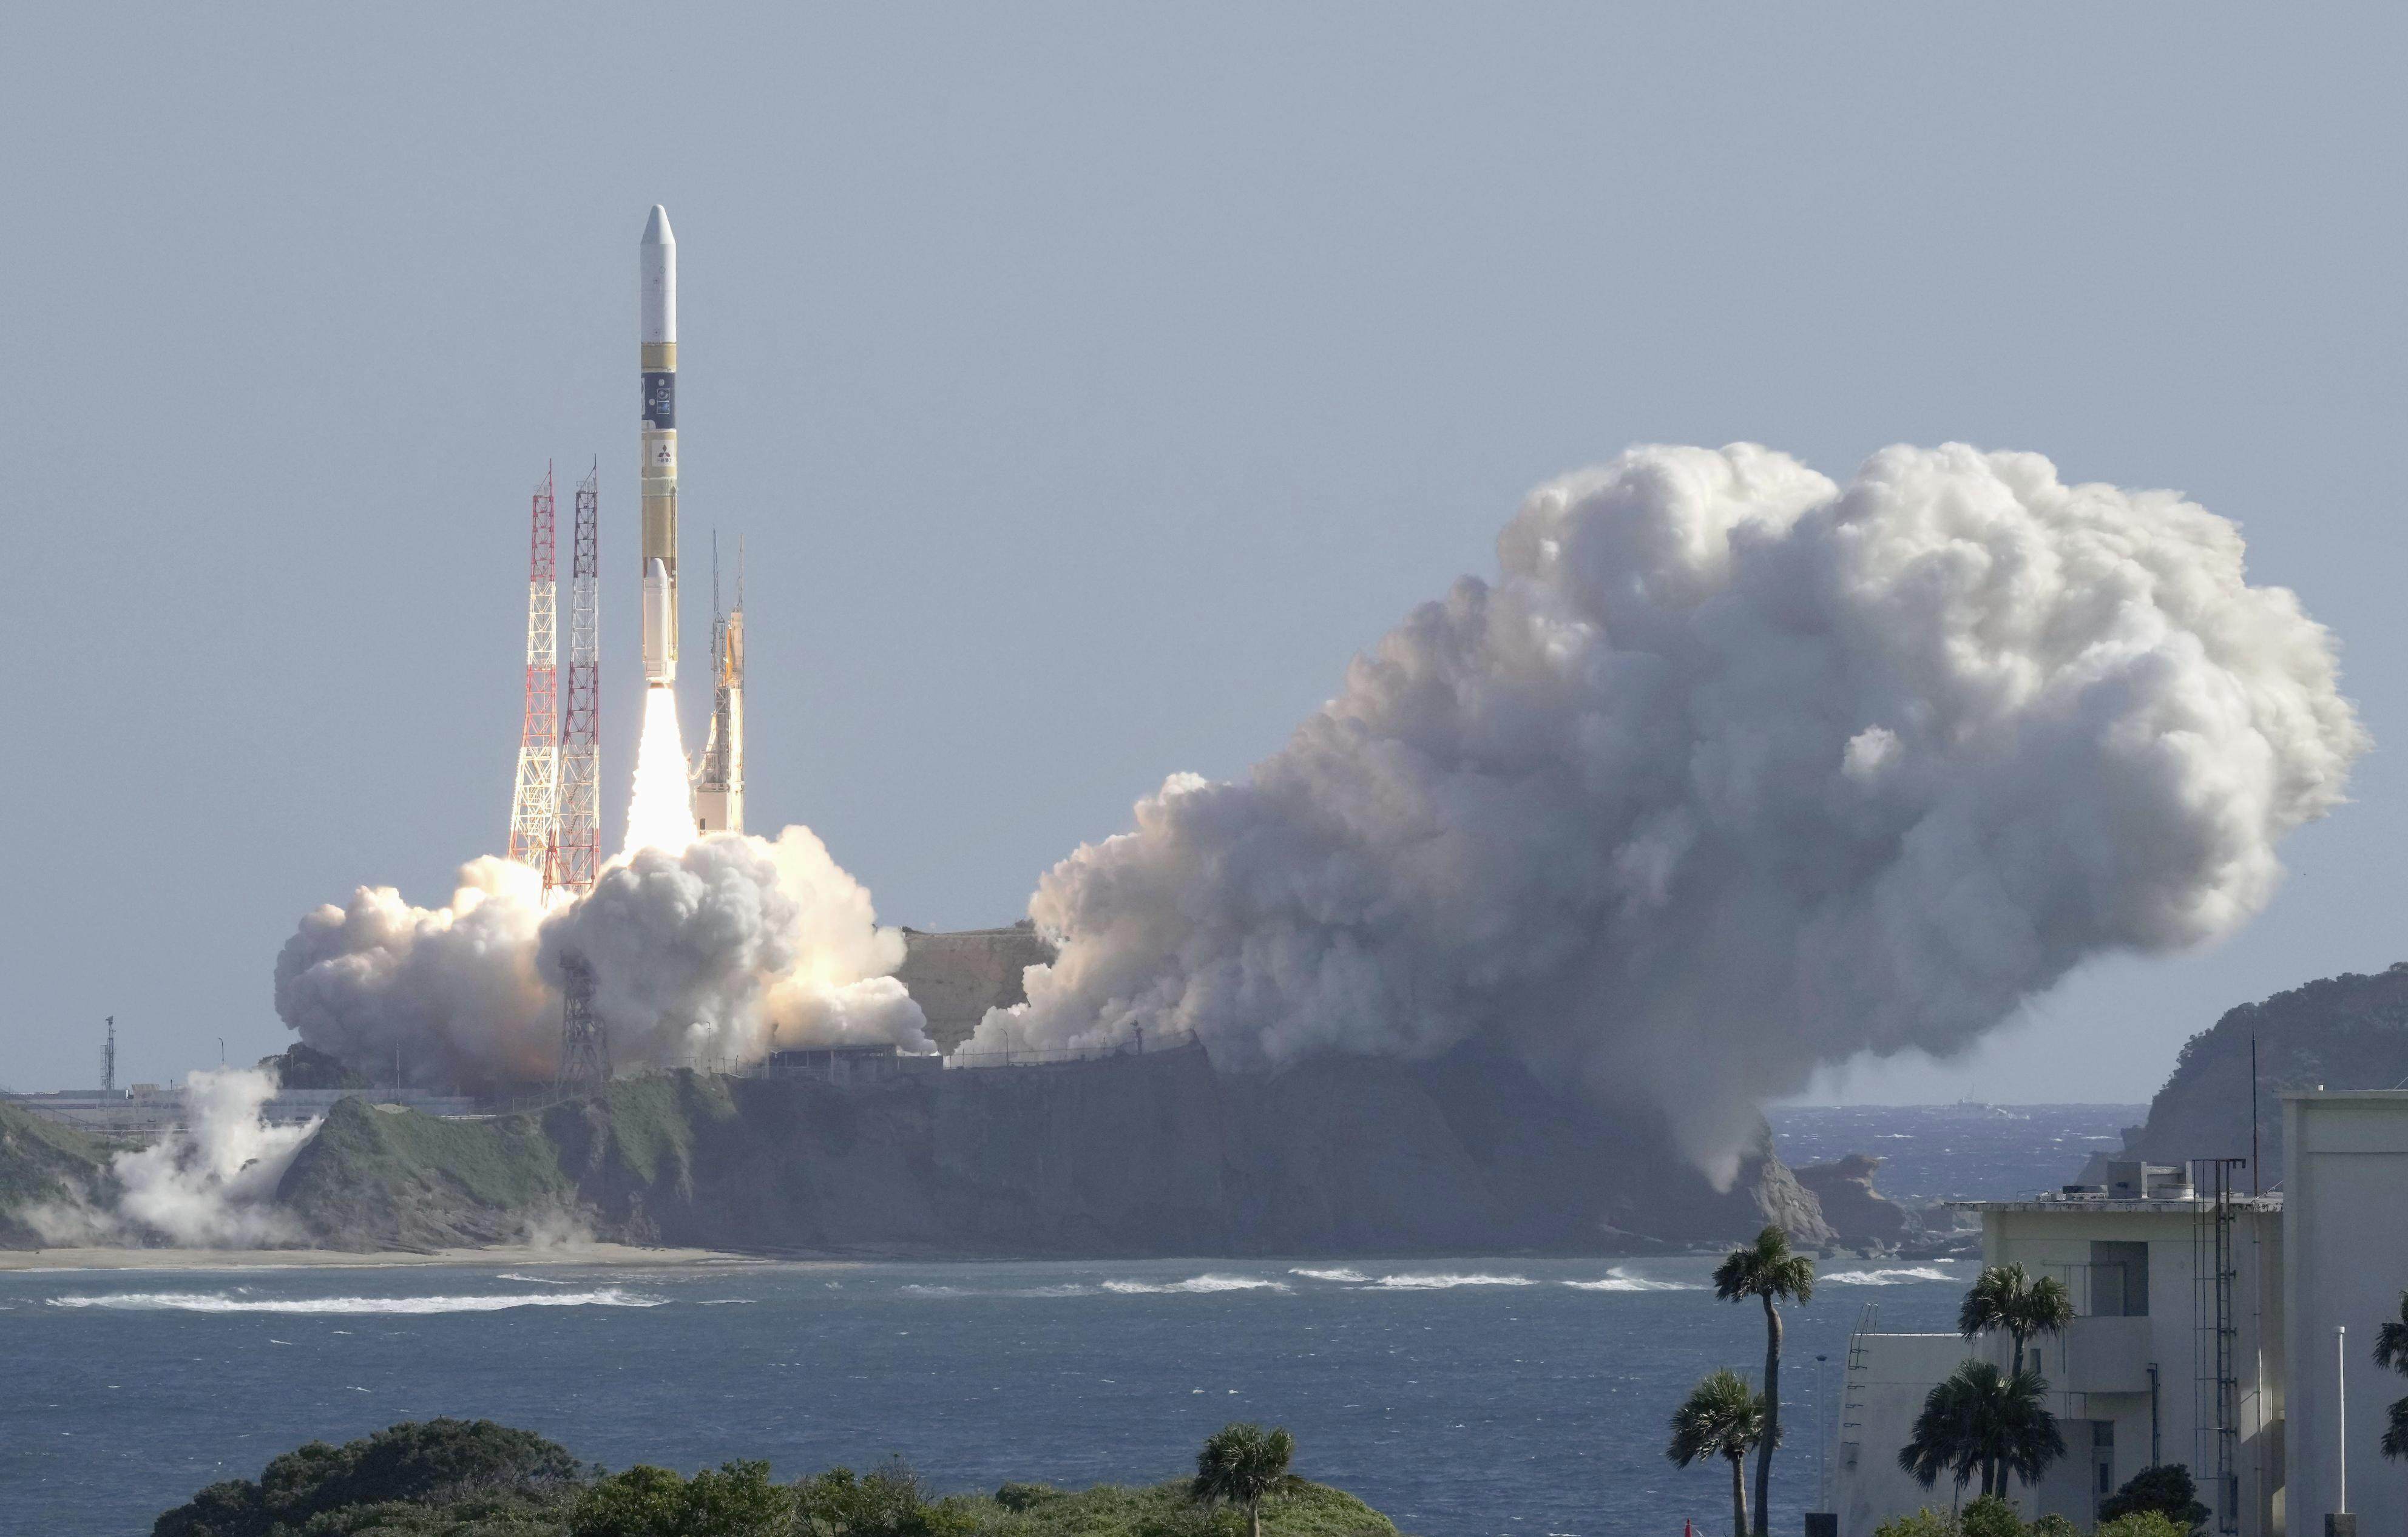 An HII-A rocket blasts off from the launch pad at Tanegashima Space Centre in Kagoshima, Japan on Thursday. Photo: AP